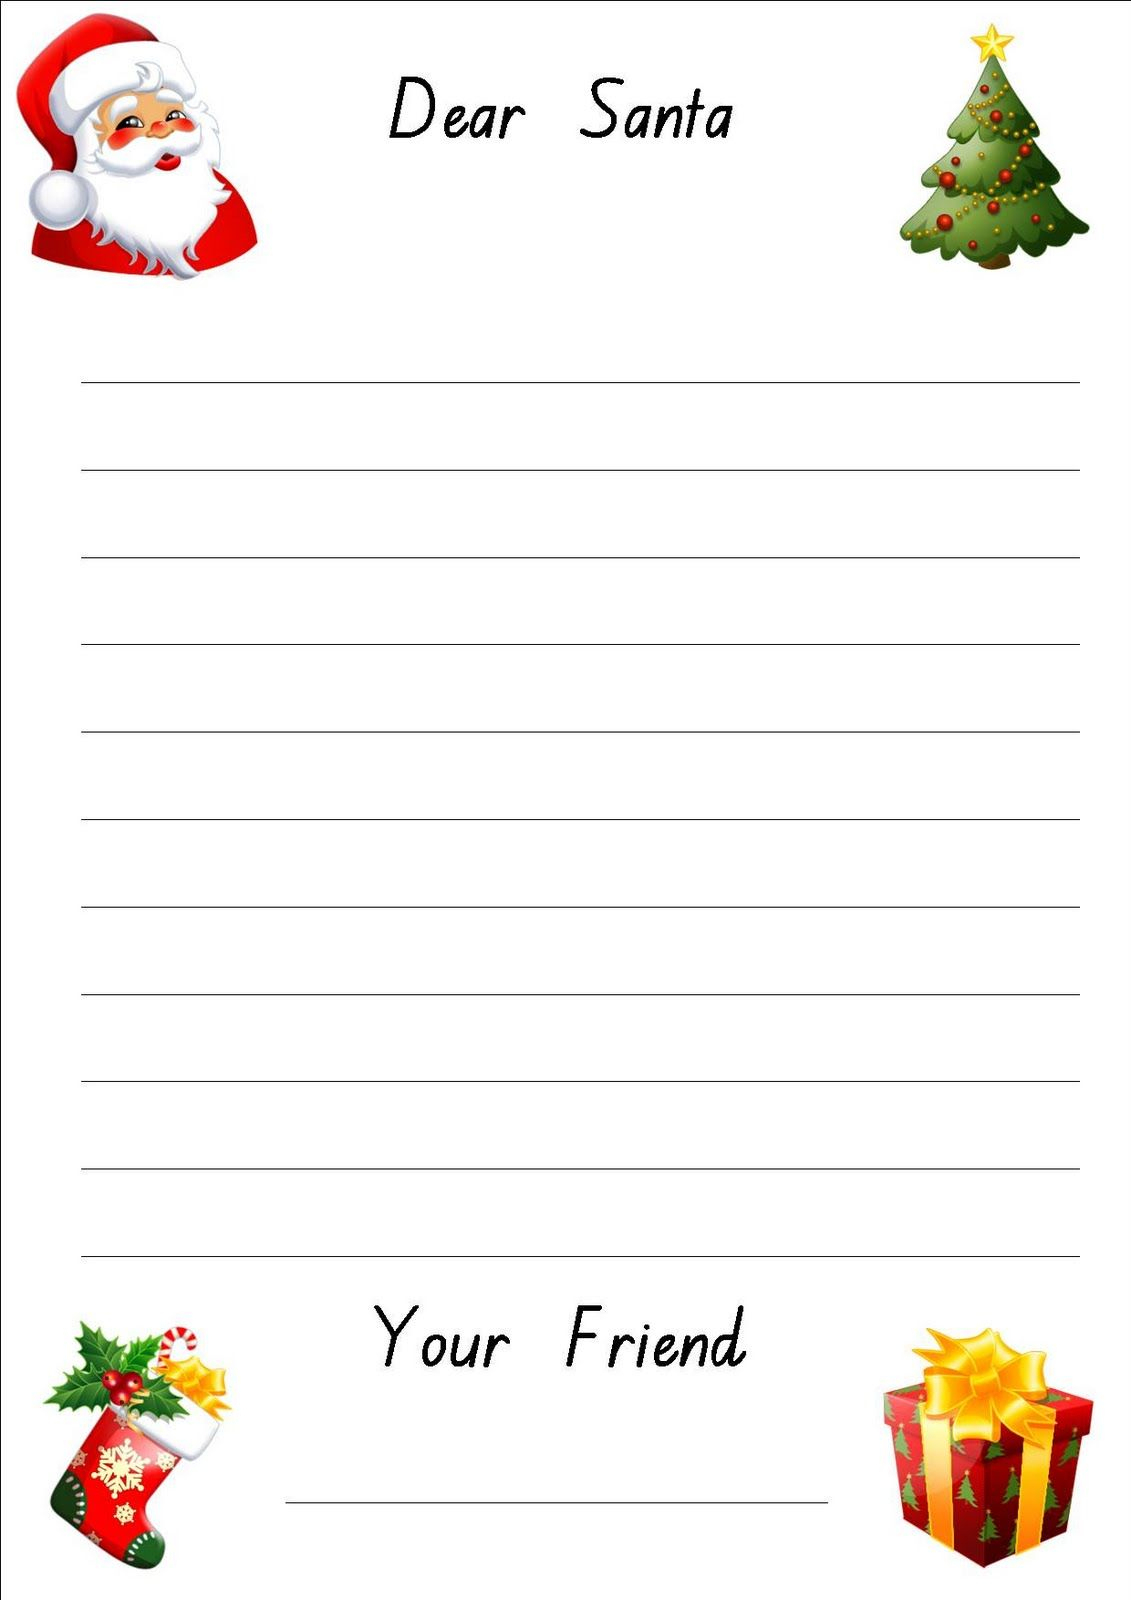 Lined Christmas Paper For Letters | Do Your Kids Write Letters To - Free Printable Santa Letter Paper